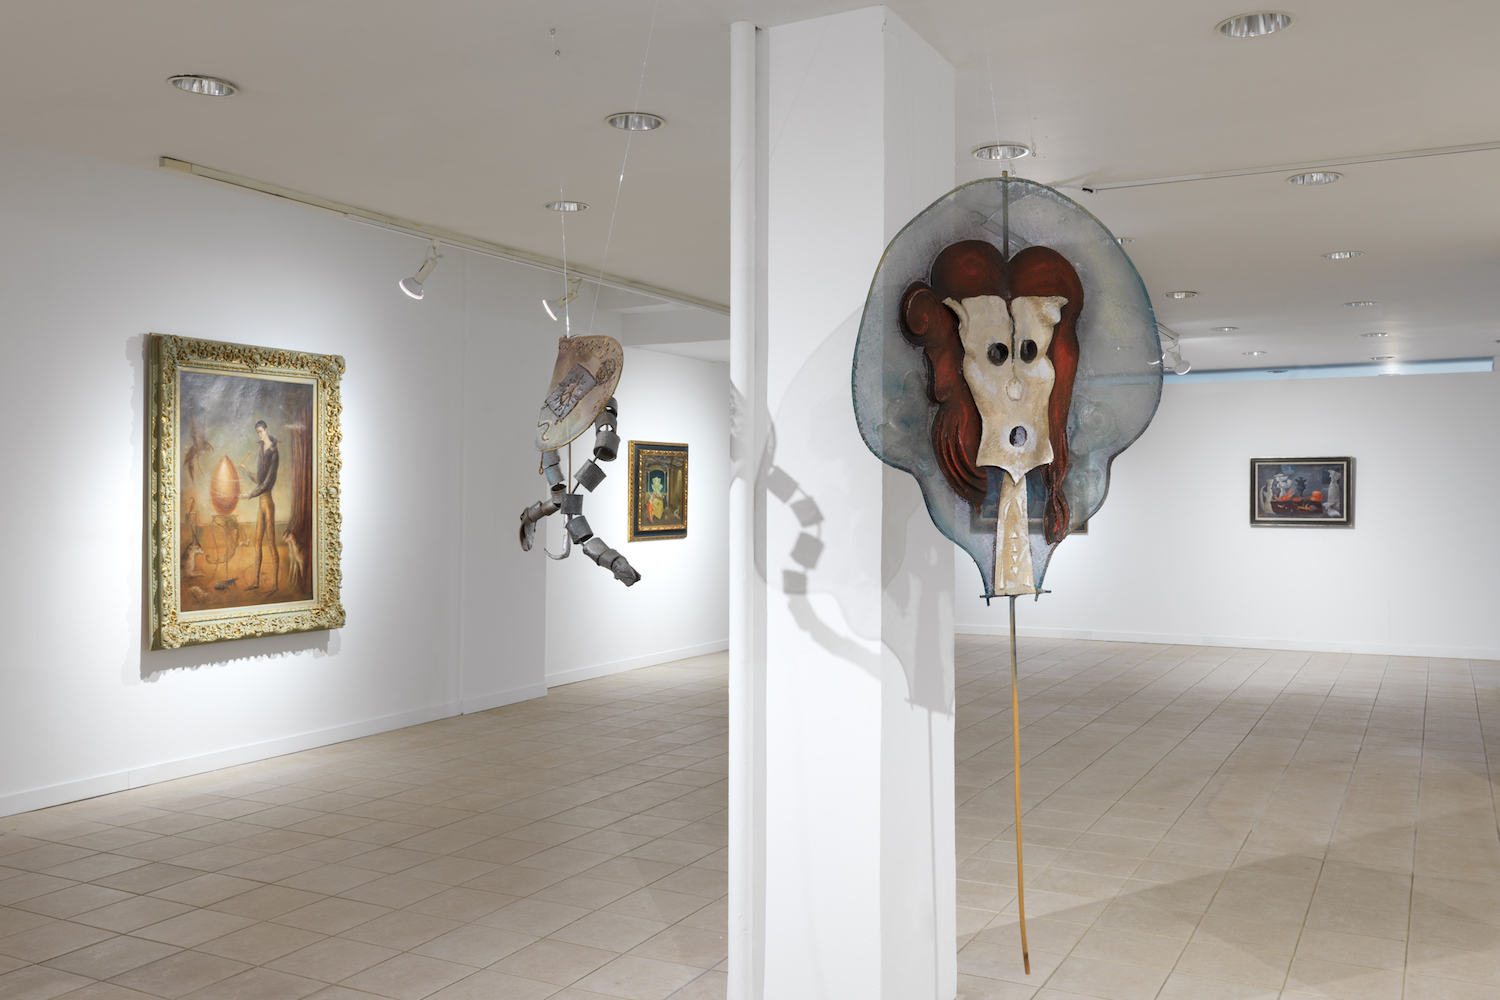   Leonora Carrington: The Story of the Last Egg,  installation view, Gallery Wendi Norris Offsite, 926 Madison Avenue, New York, NY, May 23 — June 29, 2019, photography: Dan Bradica 